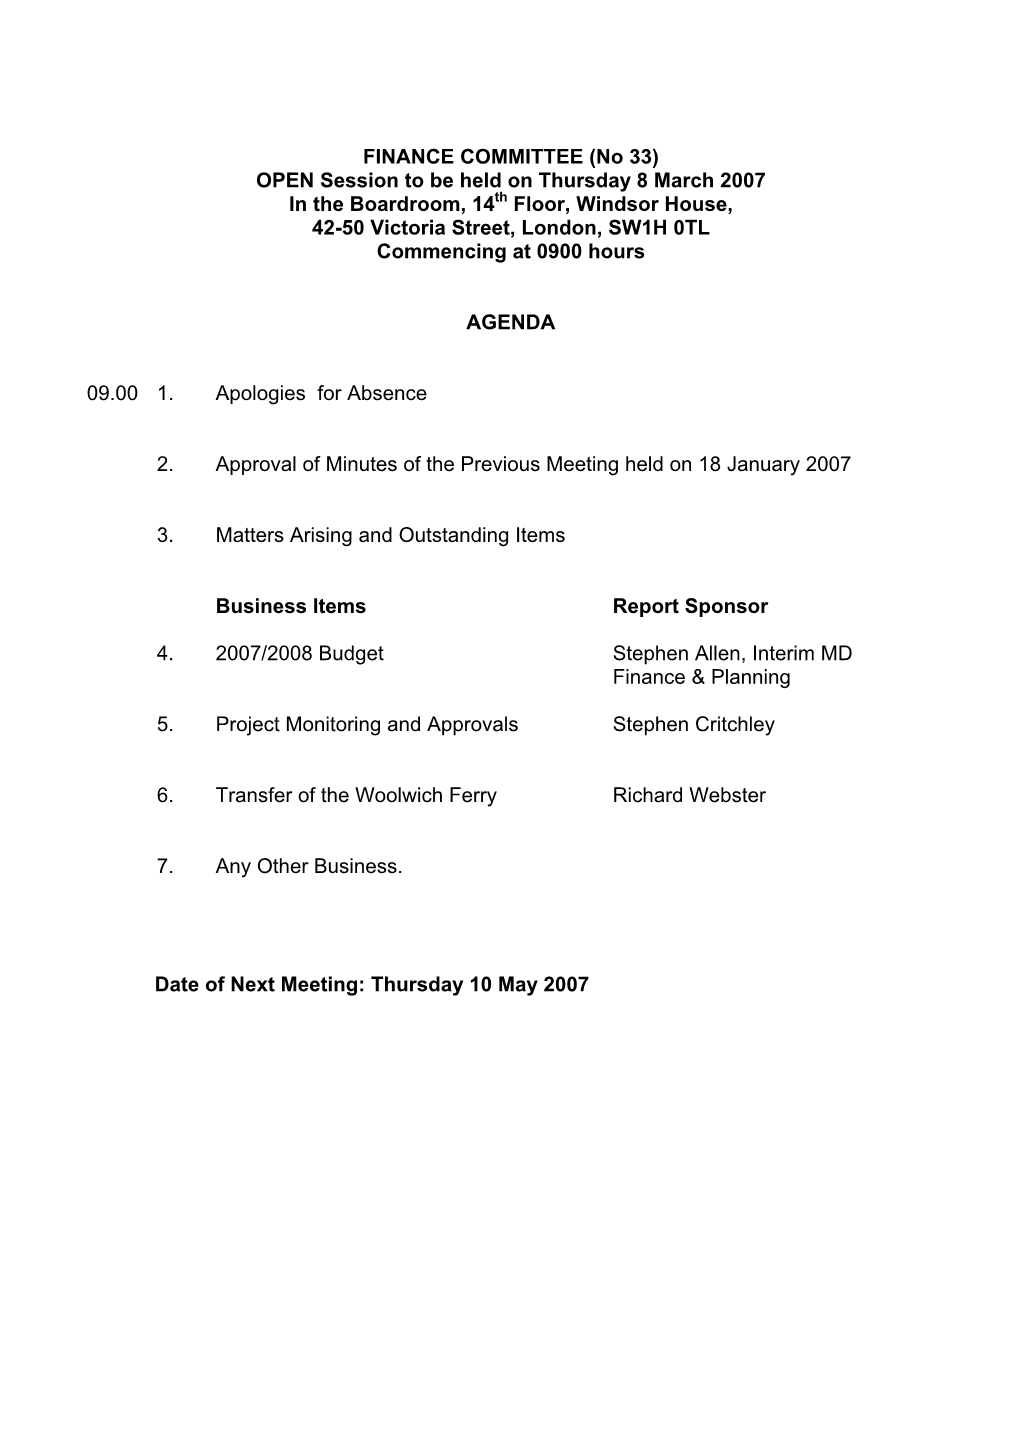 Finance Committee Agenda and Papers 08.03.07